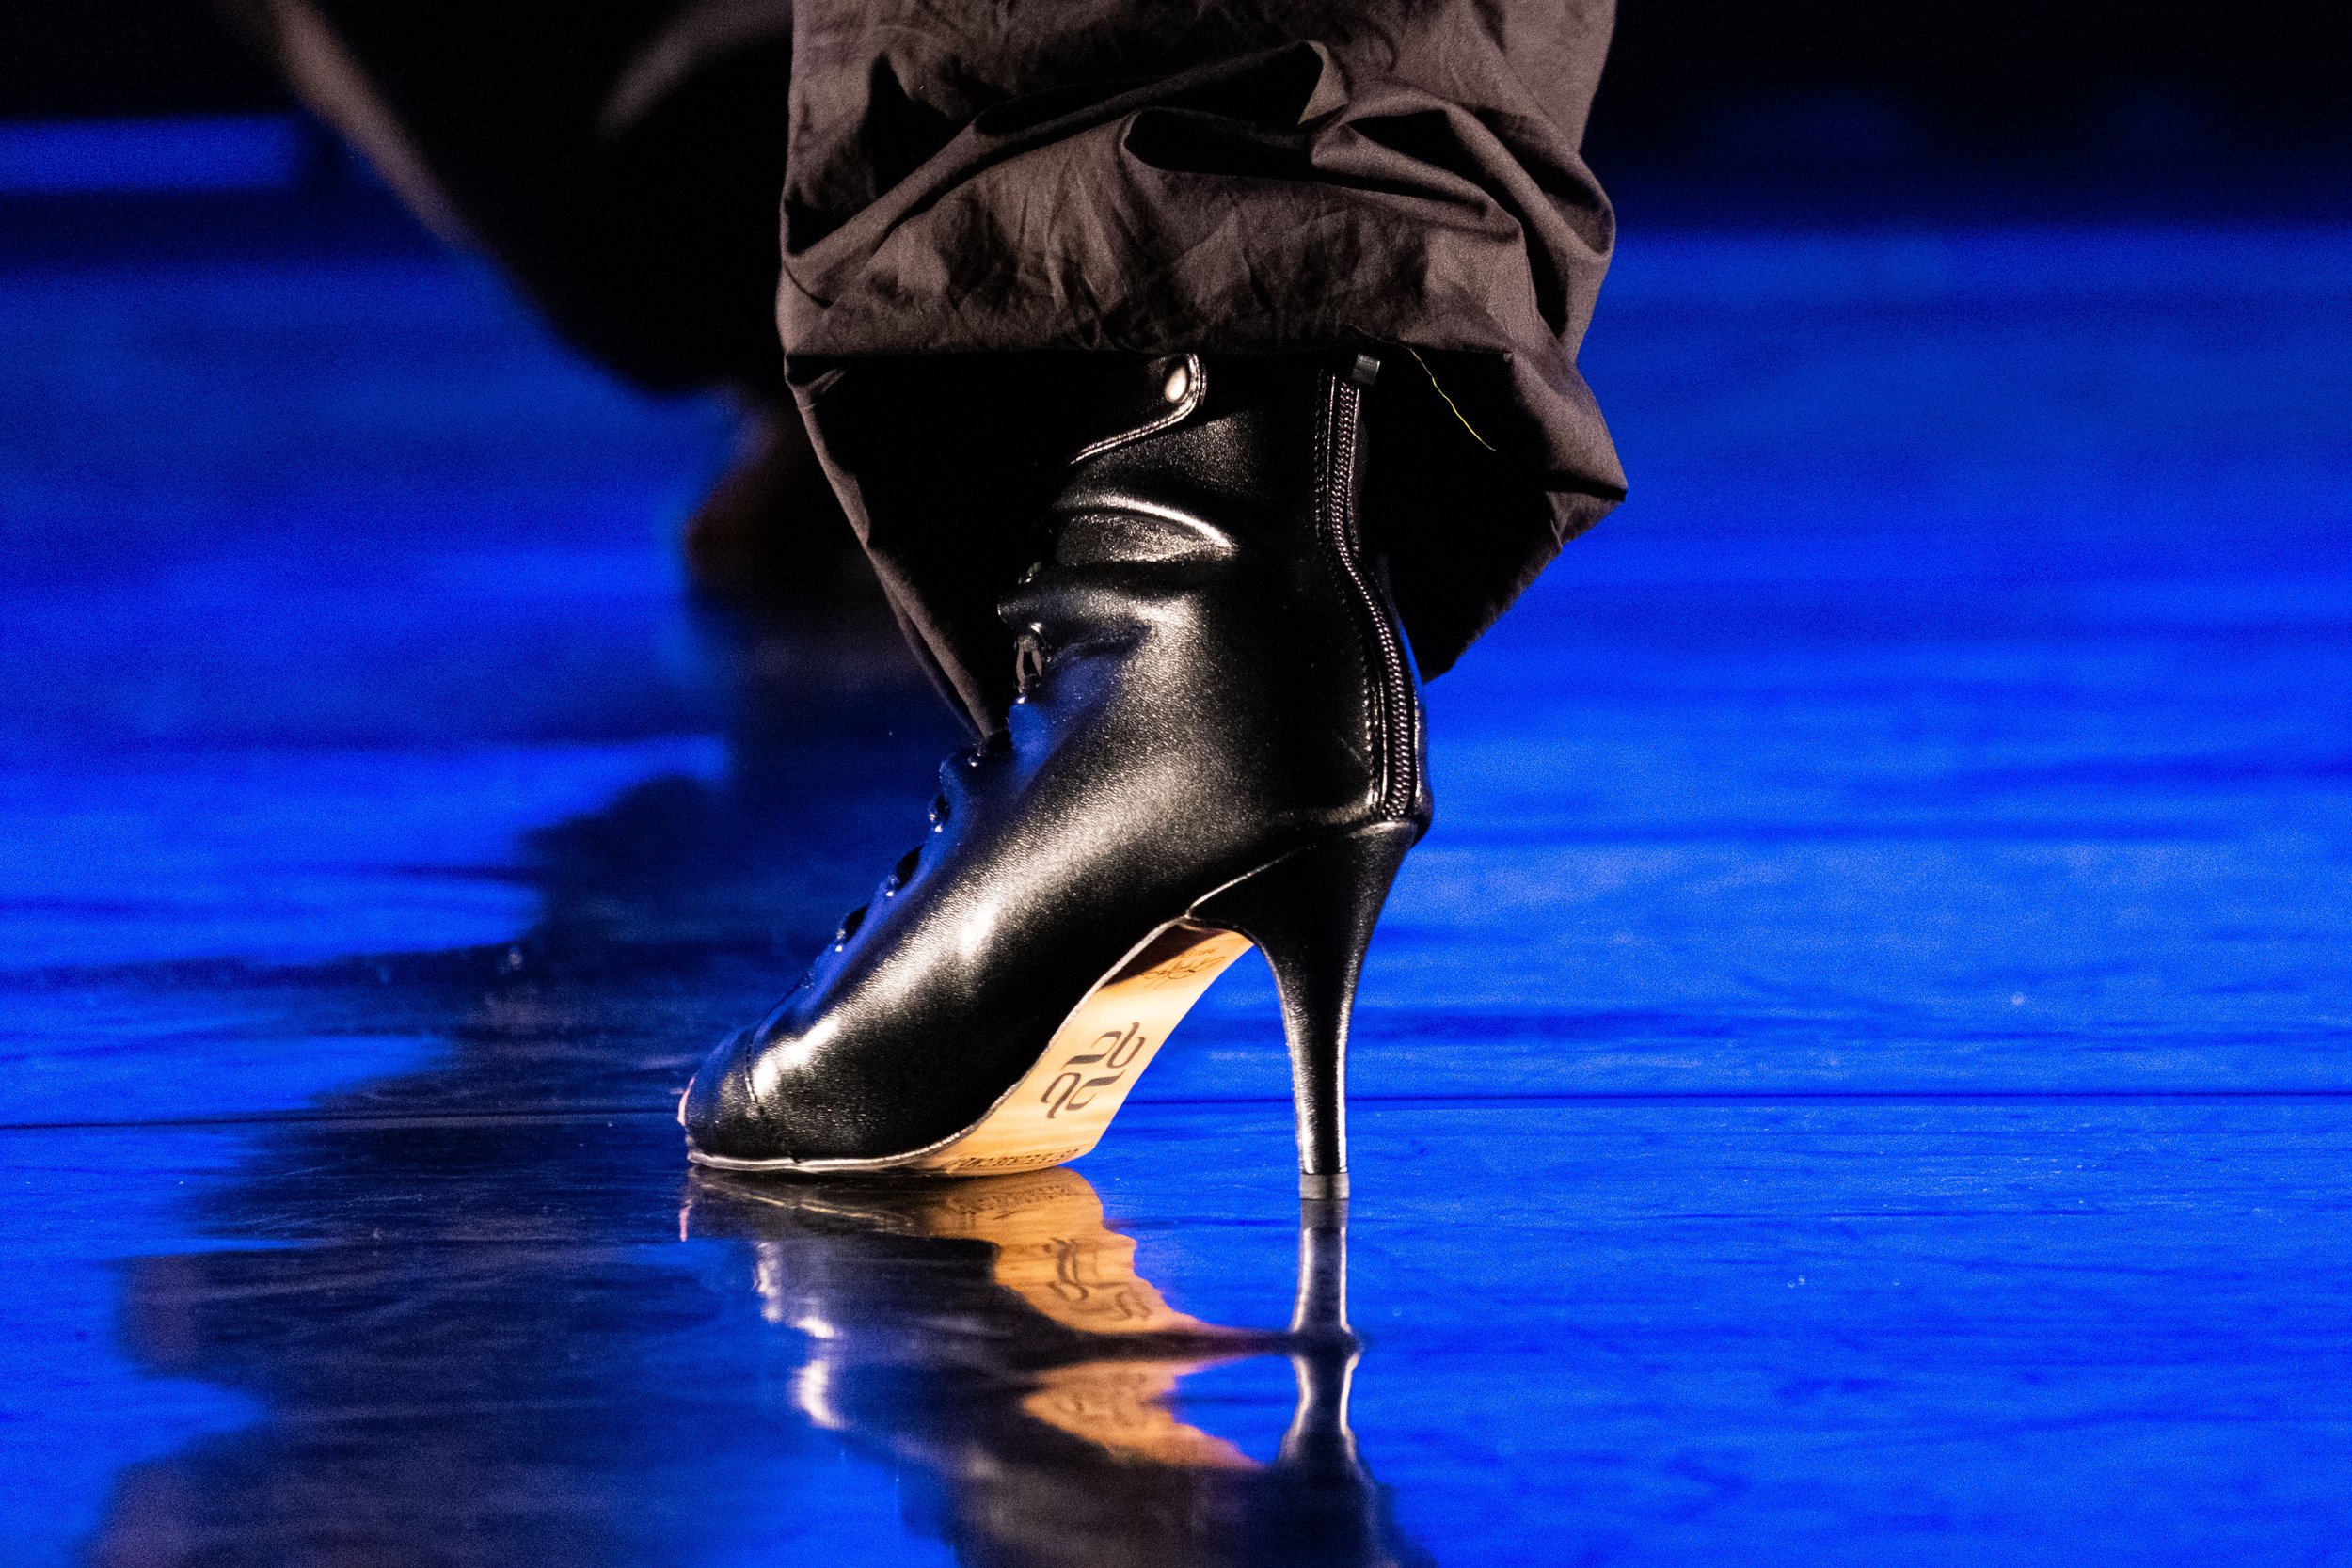  A close up of a stiletto heel during "Elegance Unleashed", a Heels dance style choreography from the USA at the dress rehearsal for Global Motion on stage at BroadStage in Santa Monica, Calif. on Wednesday, Nov. 15, 2023. (Akemi Rico | The Corsair) 